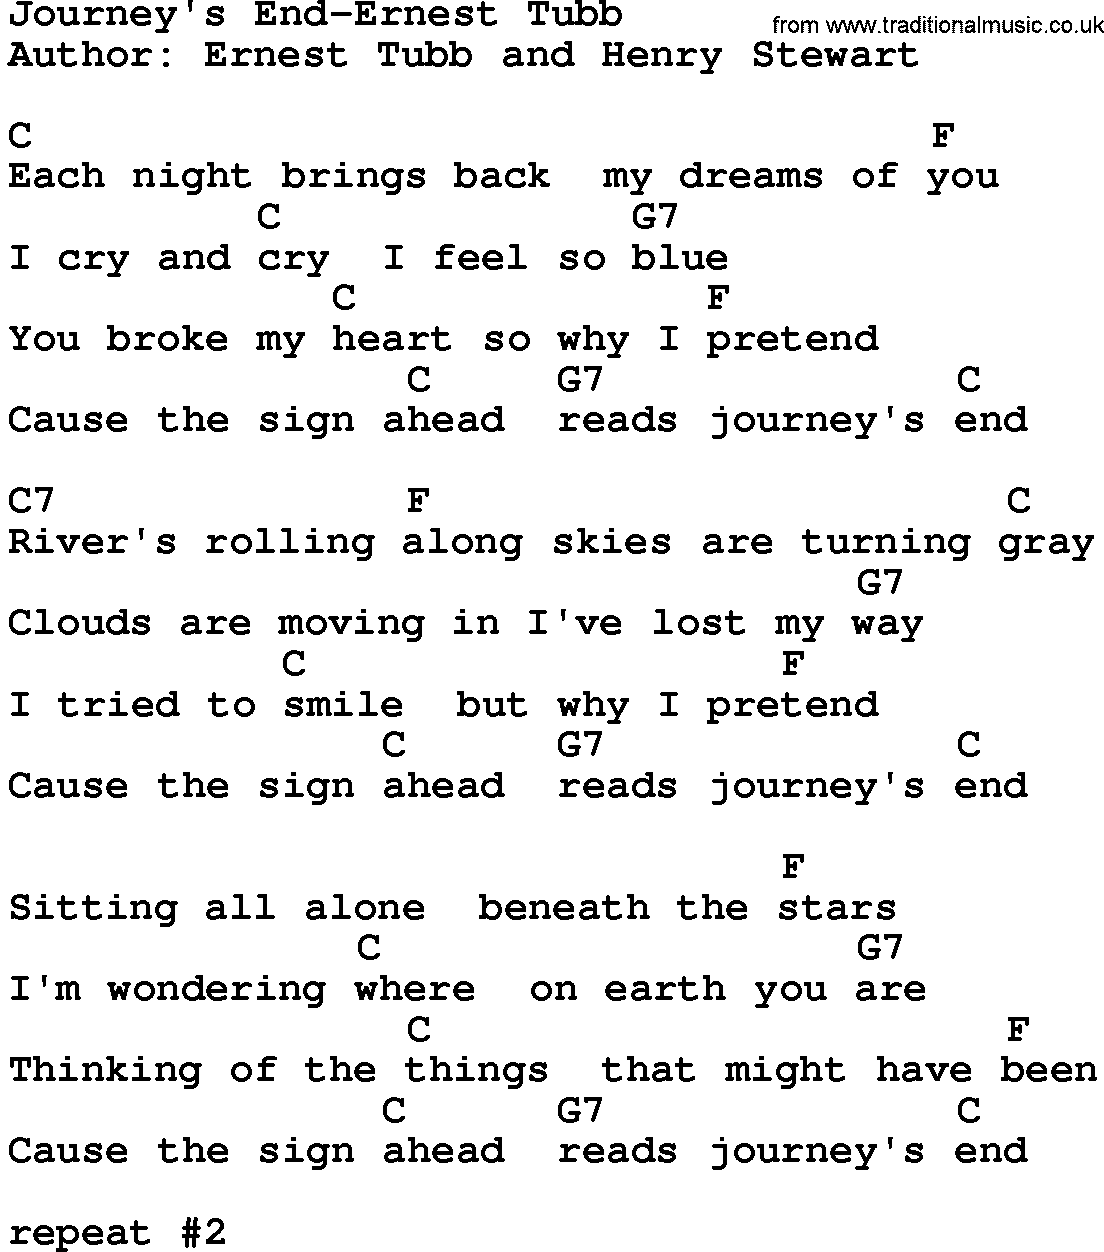 Country music song: Journey's End-Ernest Tubb lyrics and chords